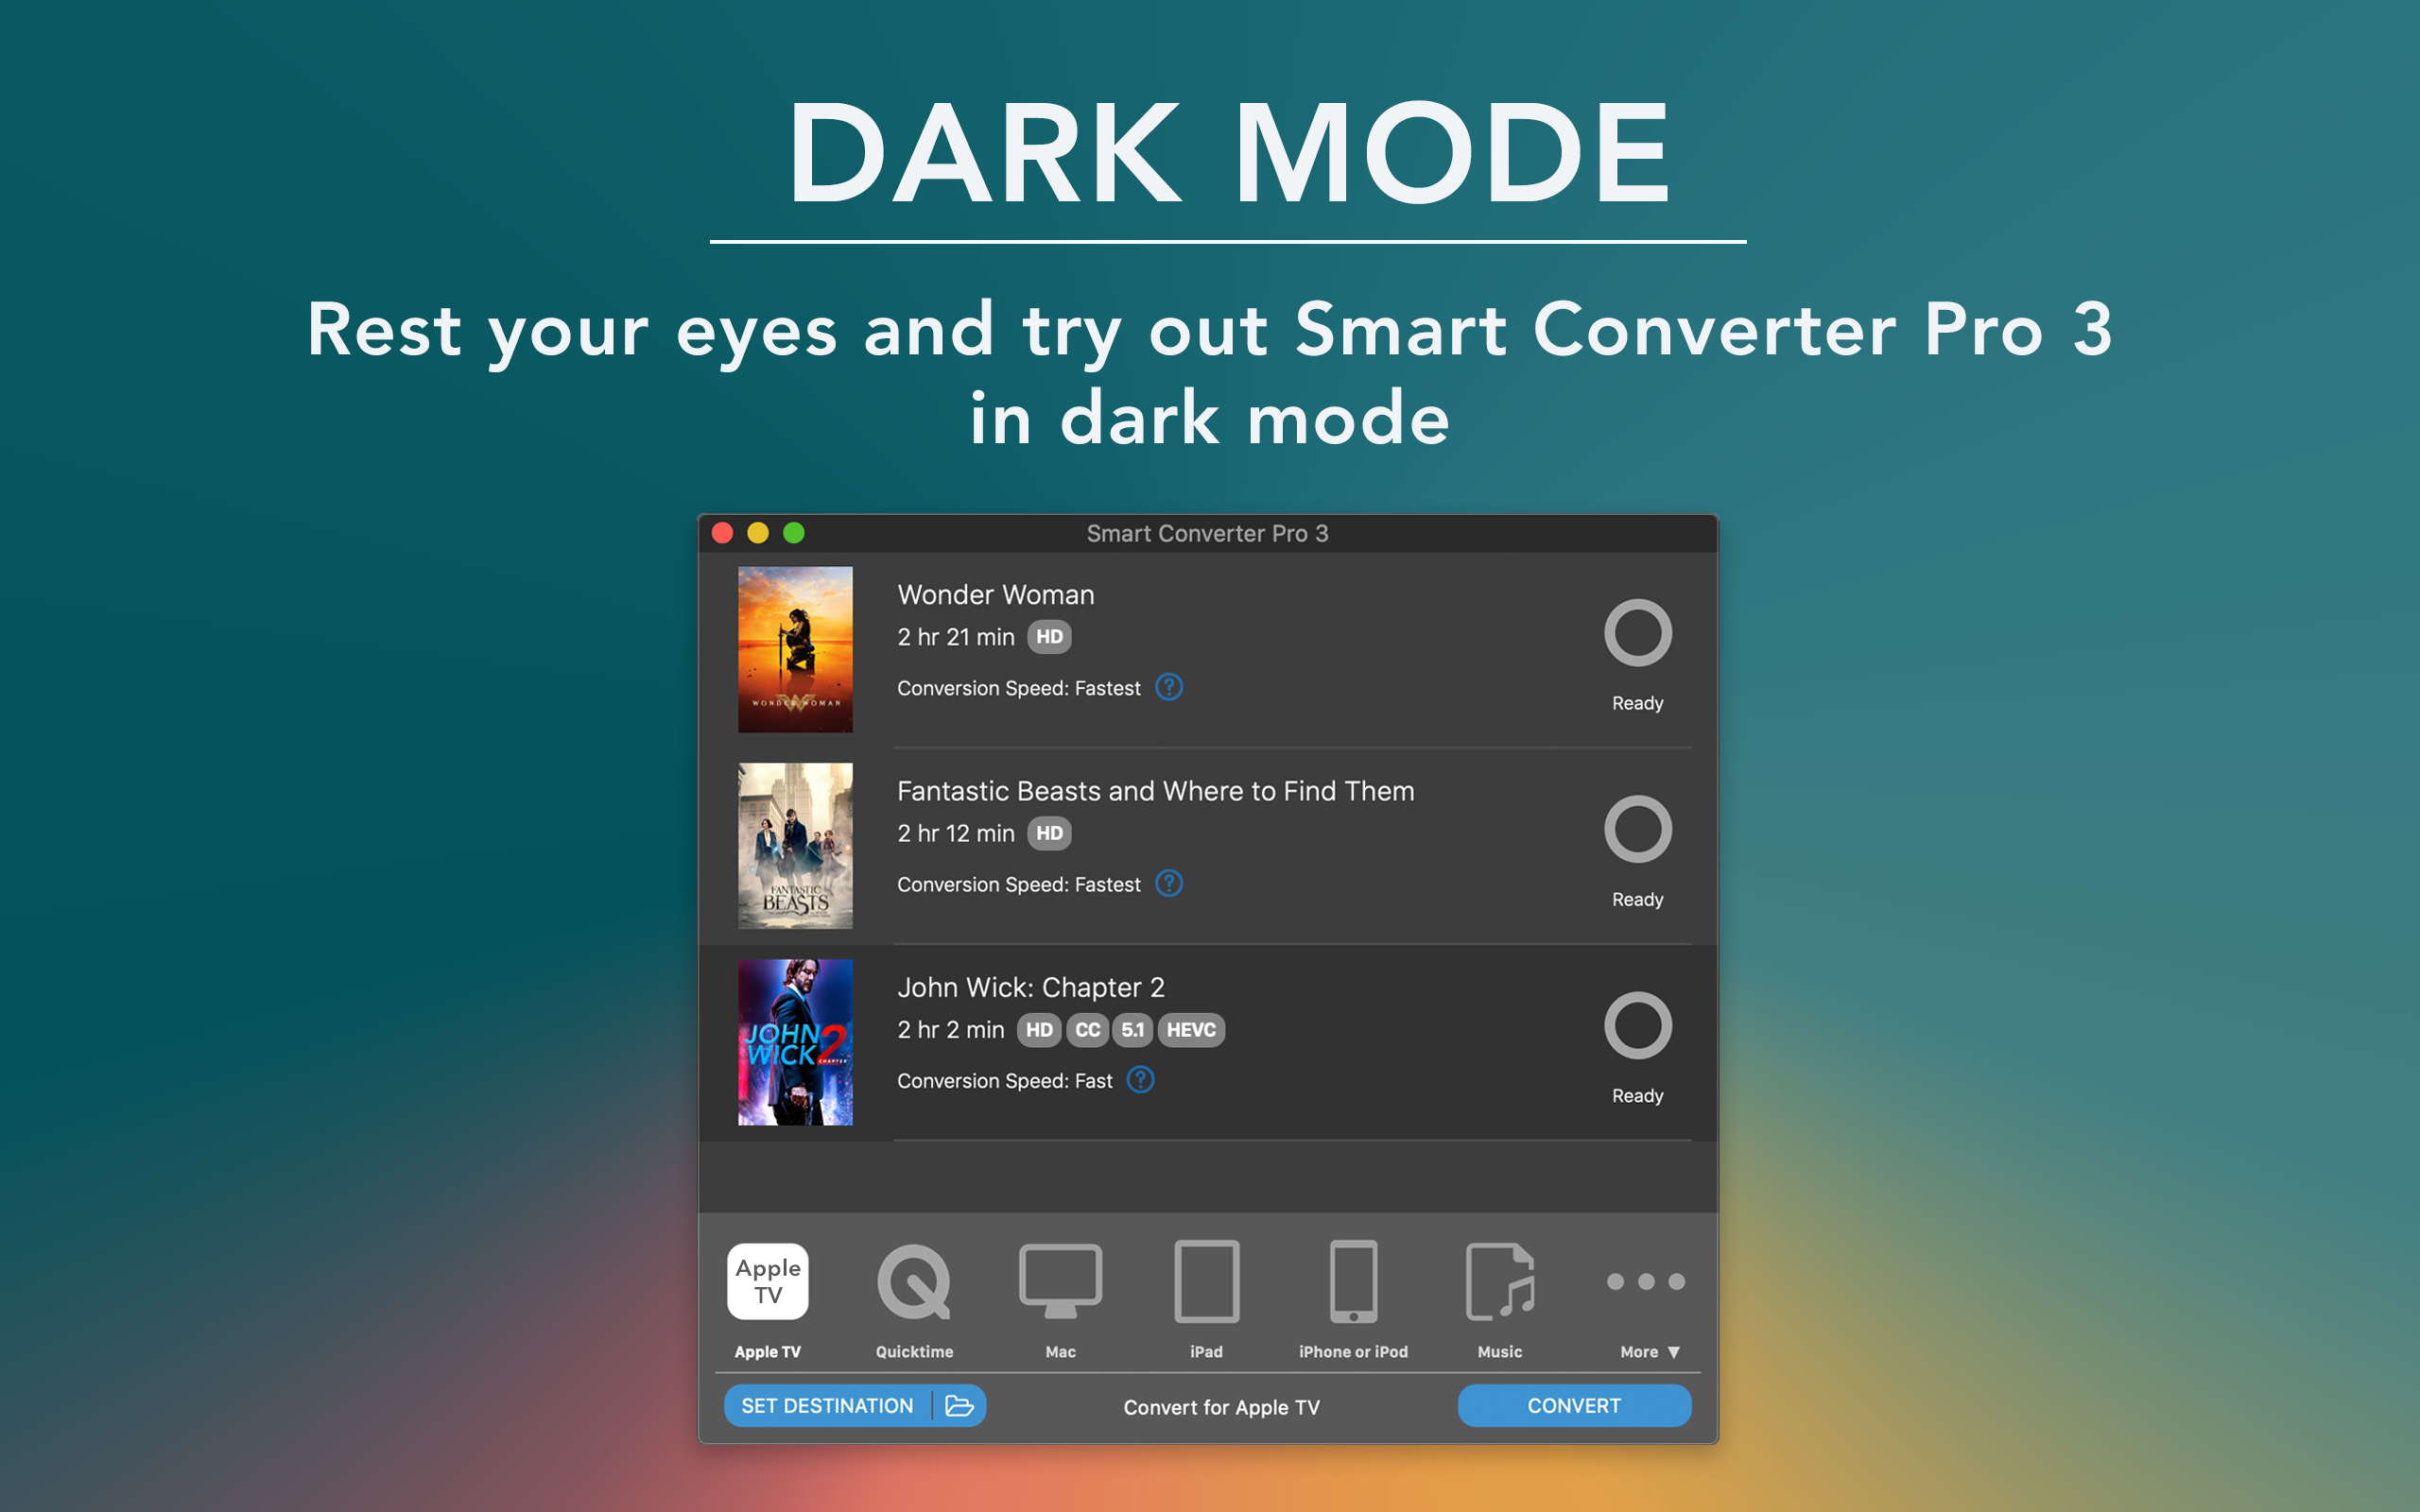 Dark Mode - Rest your eyes and try out Smart Converter Pro 3 in dark mode